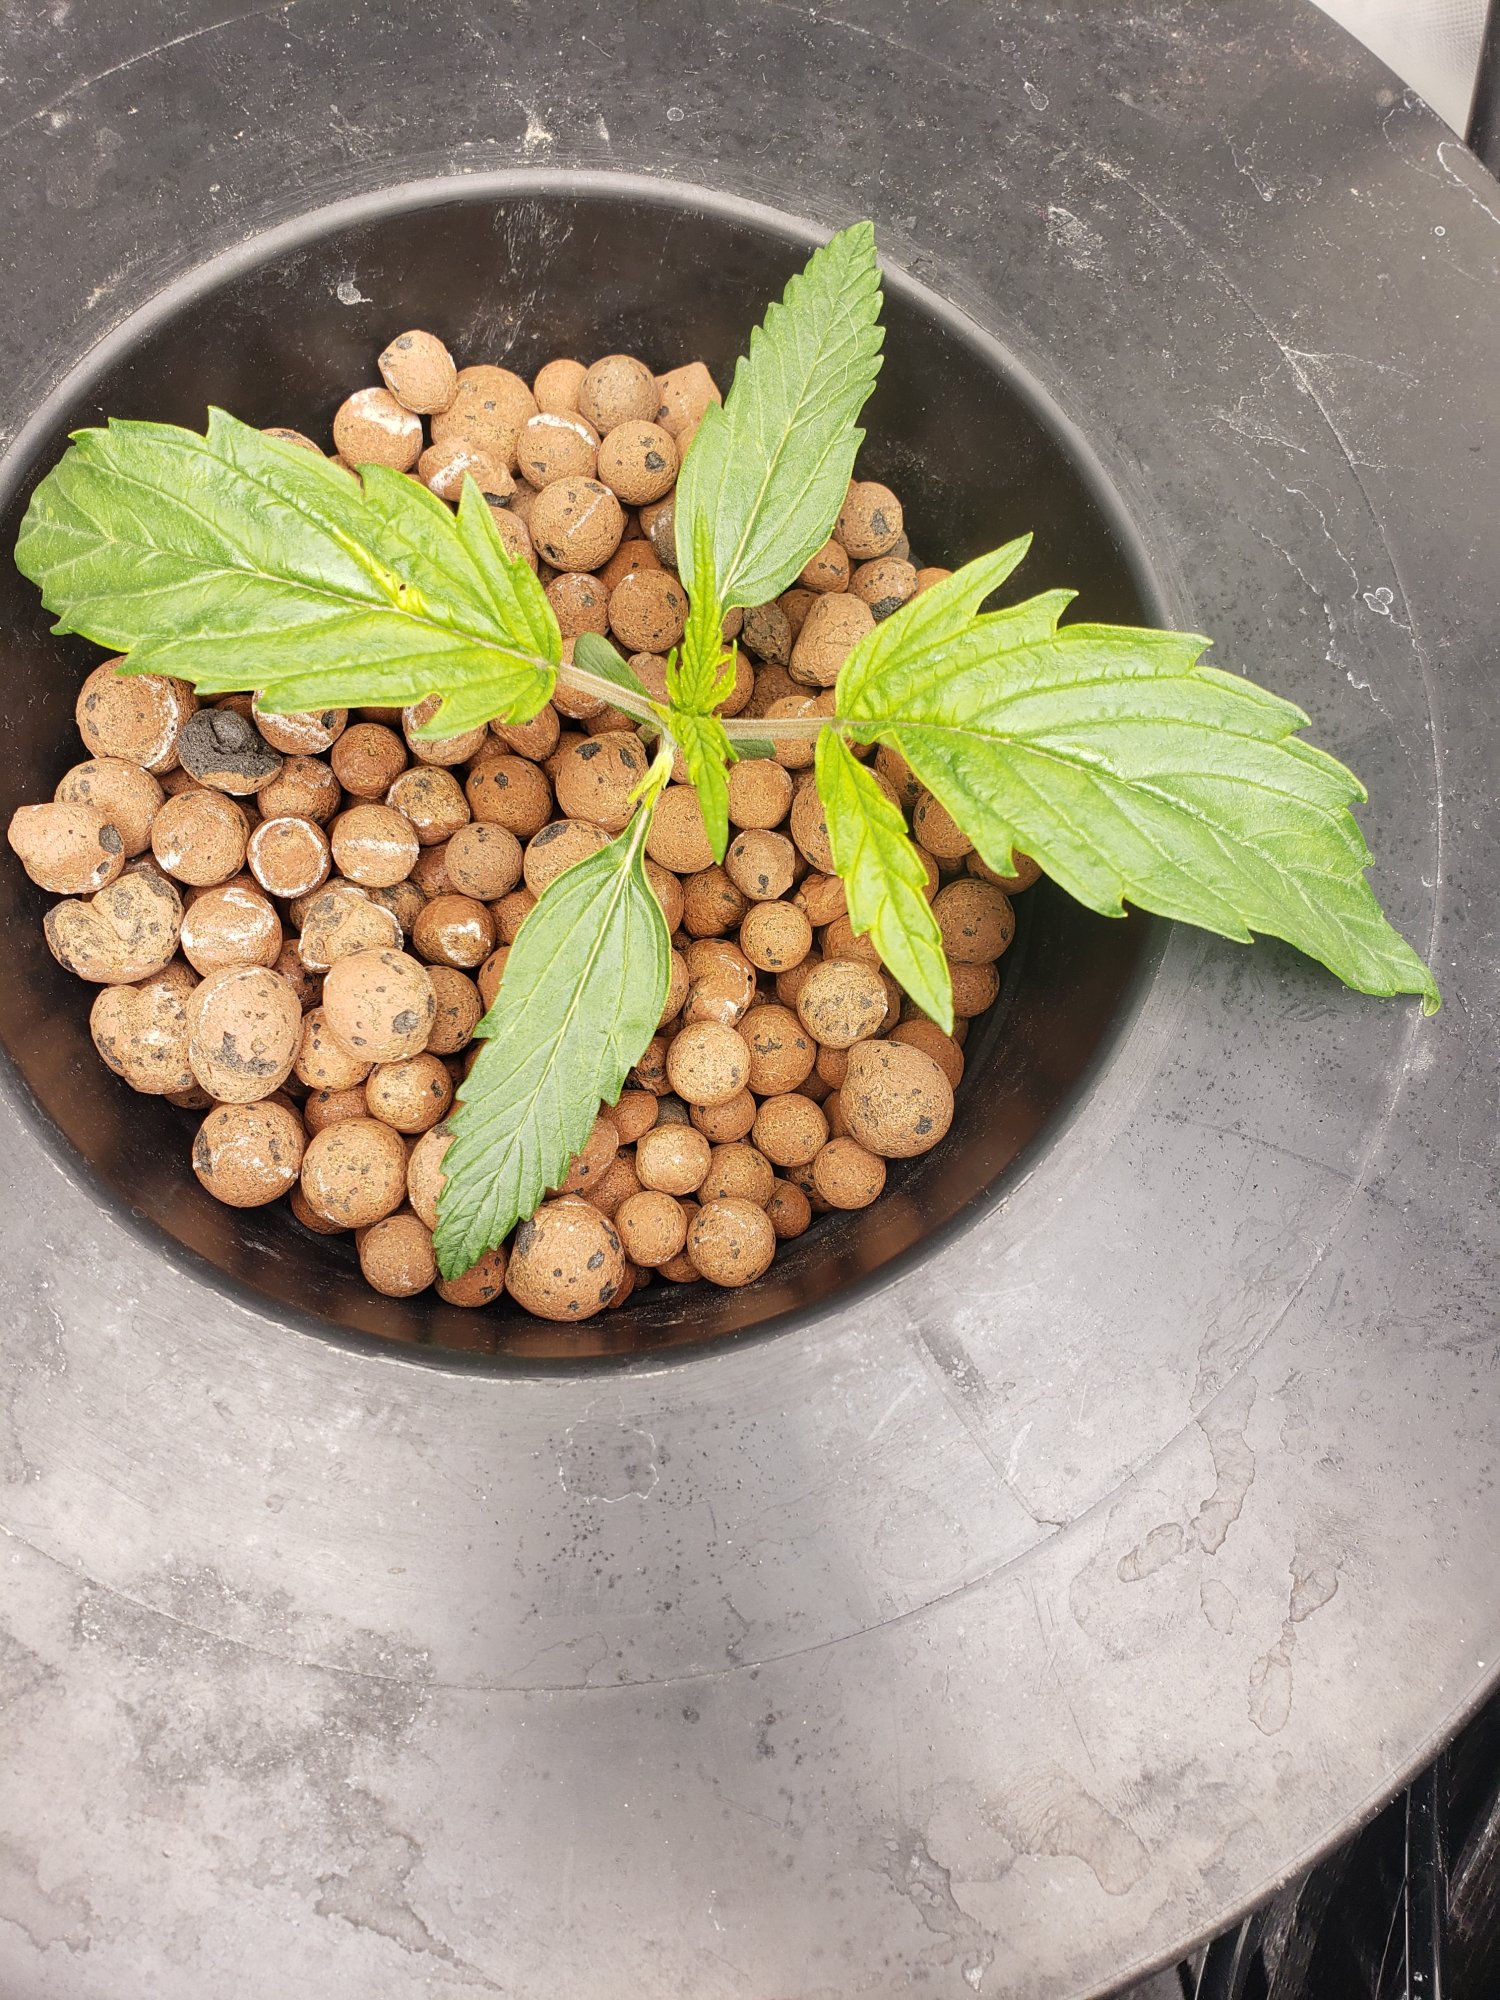 Young plants whats going wrong 3